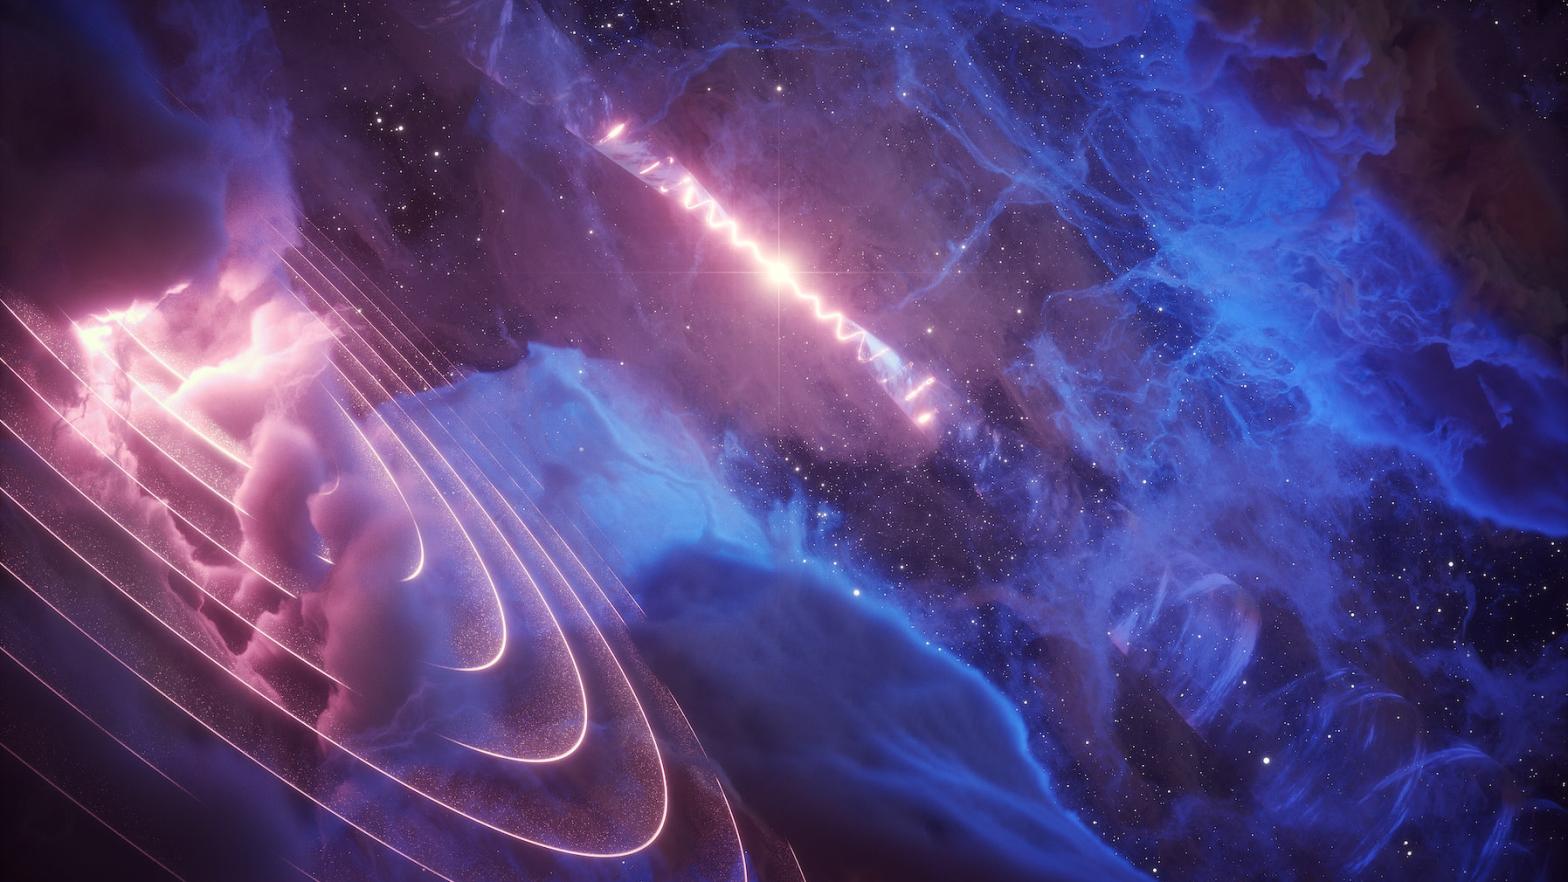 Artist's conception of microquasar SS 433, as seen in the background, and the gas cloud Fermi J1913+0515, seen in the foreground and left. The two objects are in rhythm, despite being 100 light-years apart.  (Image: DESY, Science Communication Lab)